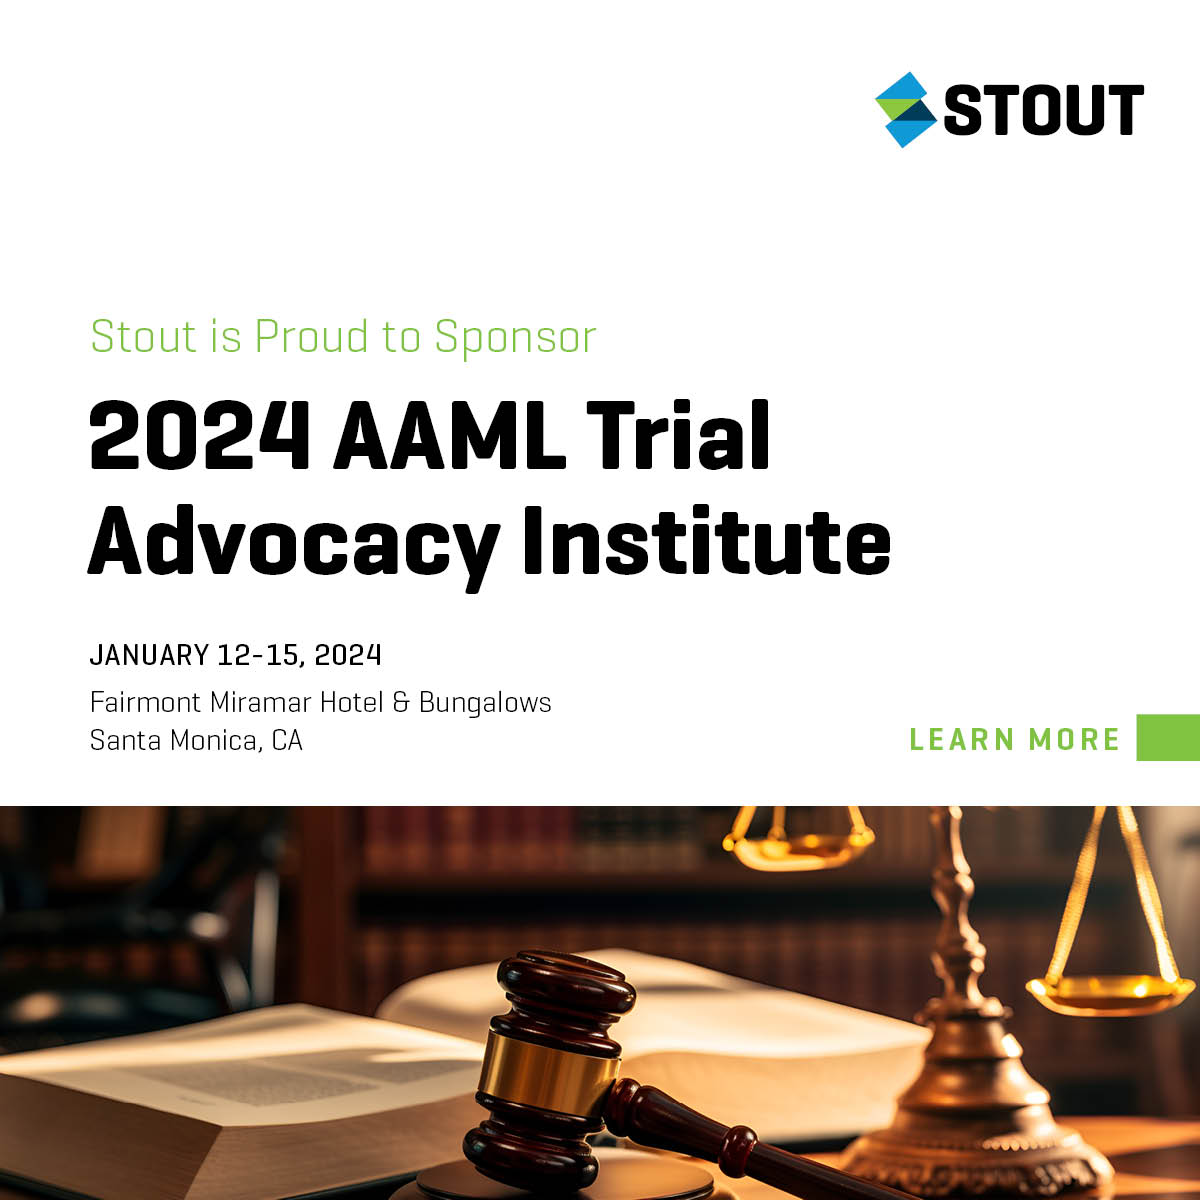 Stout is thrilled to sponsor the 2024 AAML SoCal Trial Advocacy Institute. Join our accomplished professionals, John Ashbrook, Michele Atkinson, Todd Larson, Peggy Swearingen, and Joshua Vannetti, at the event to elevate your legal expertise. Learn more: bit.ly/3uGBUCr